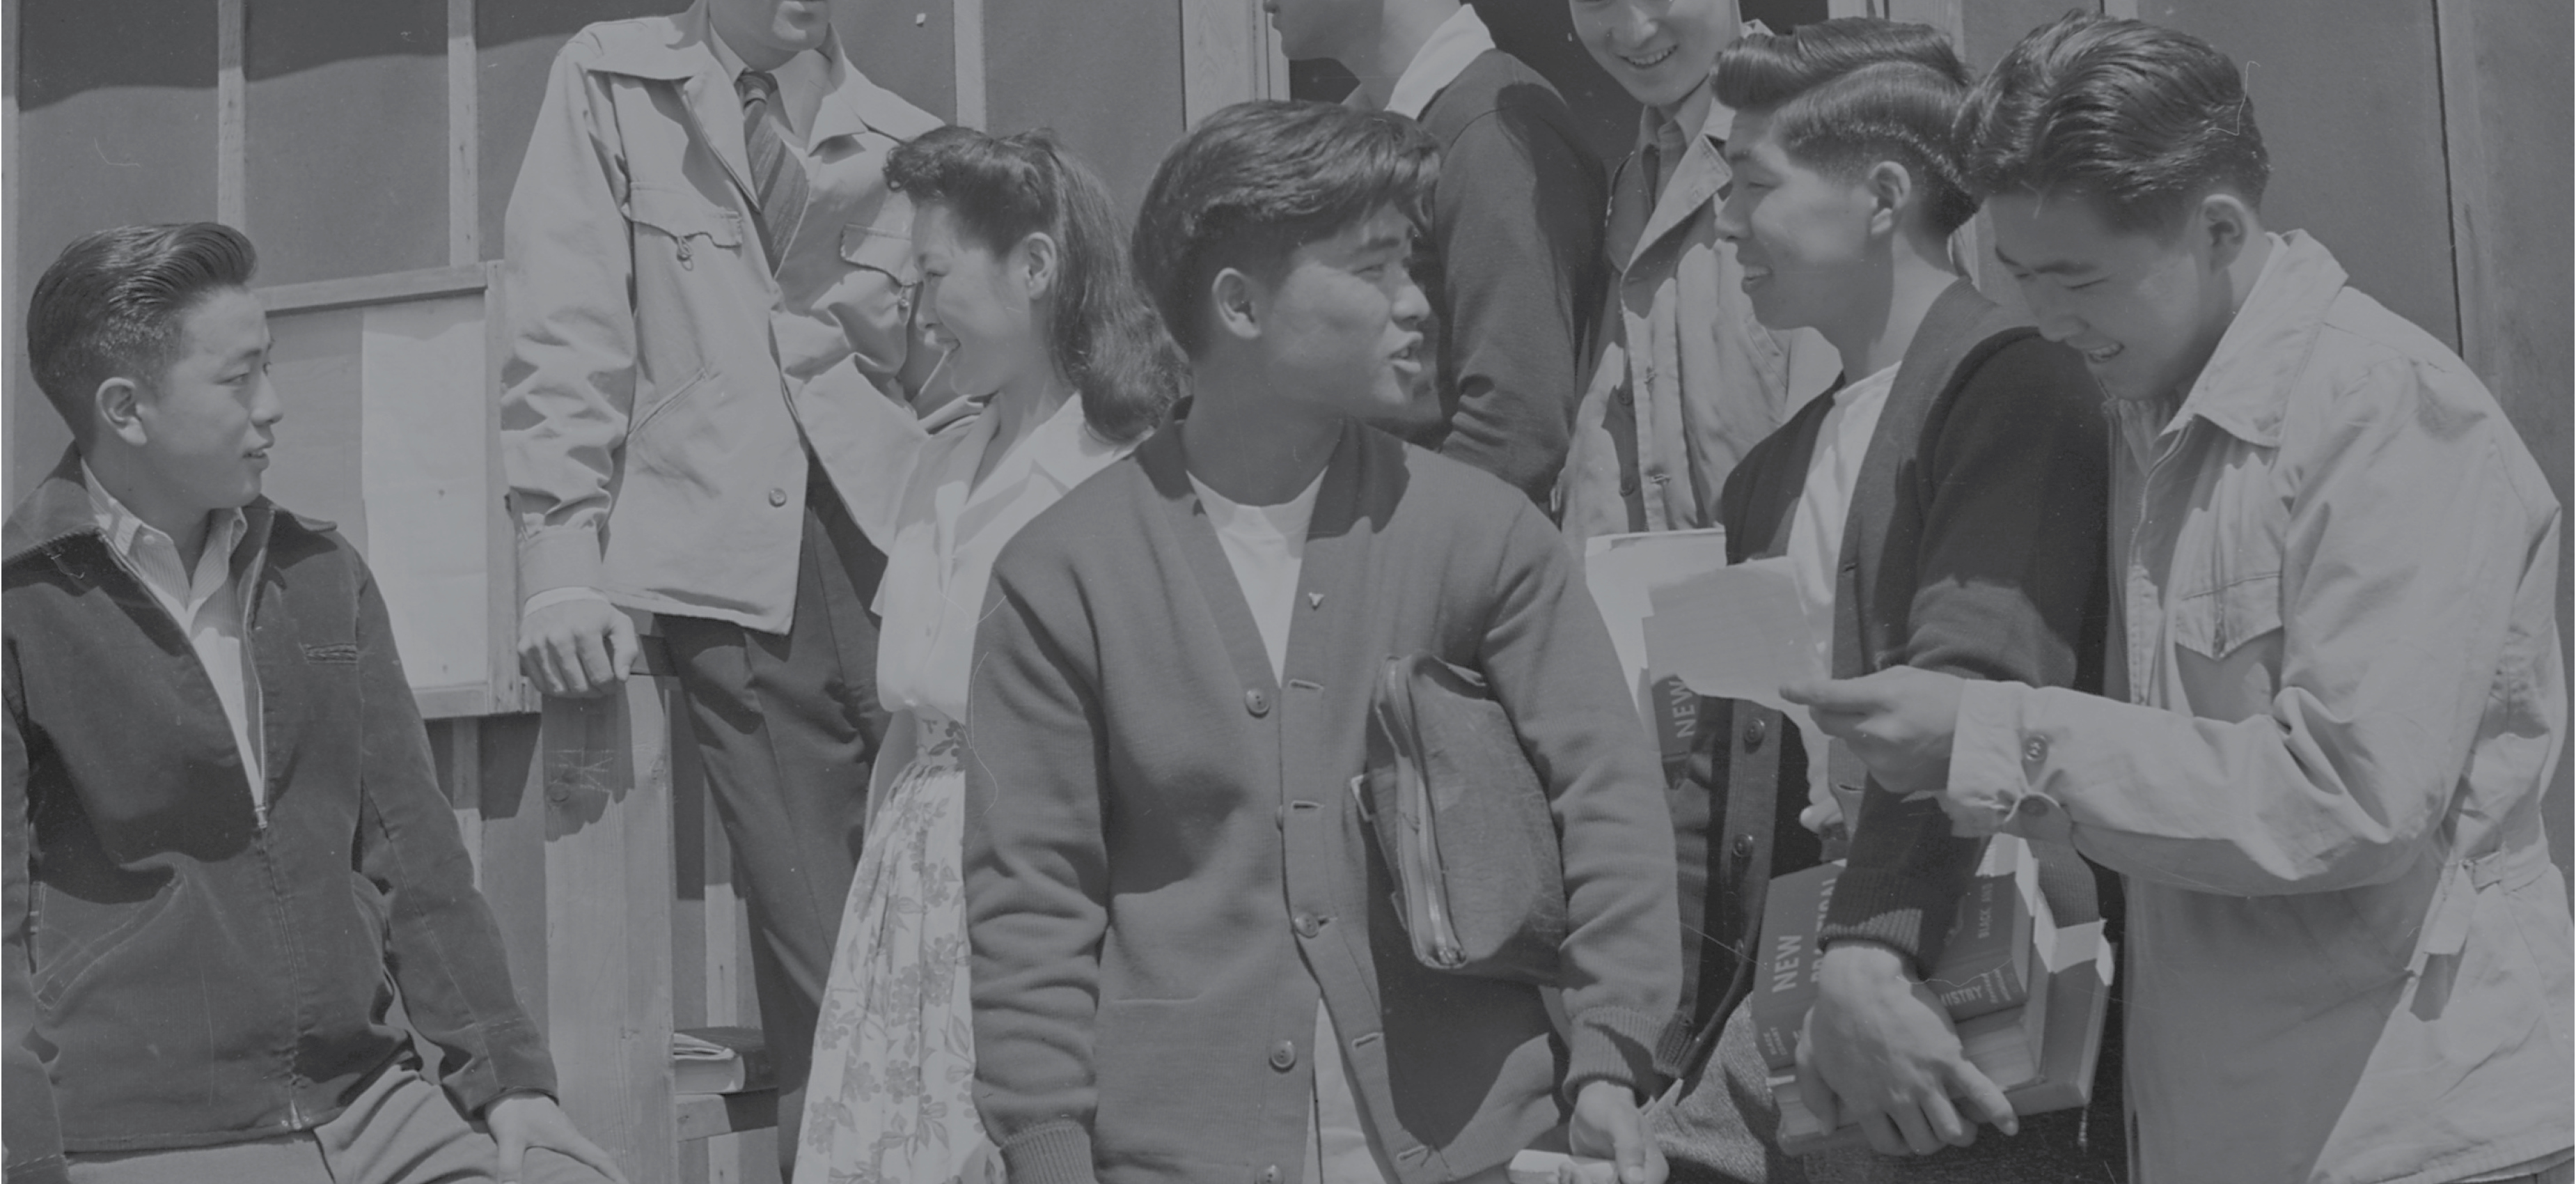 Group of Japanese Americans mingle in historic photo from the 1940s.